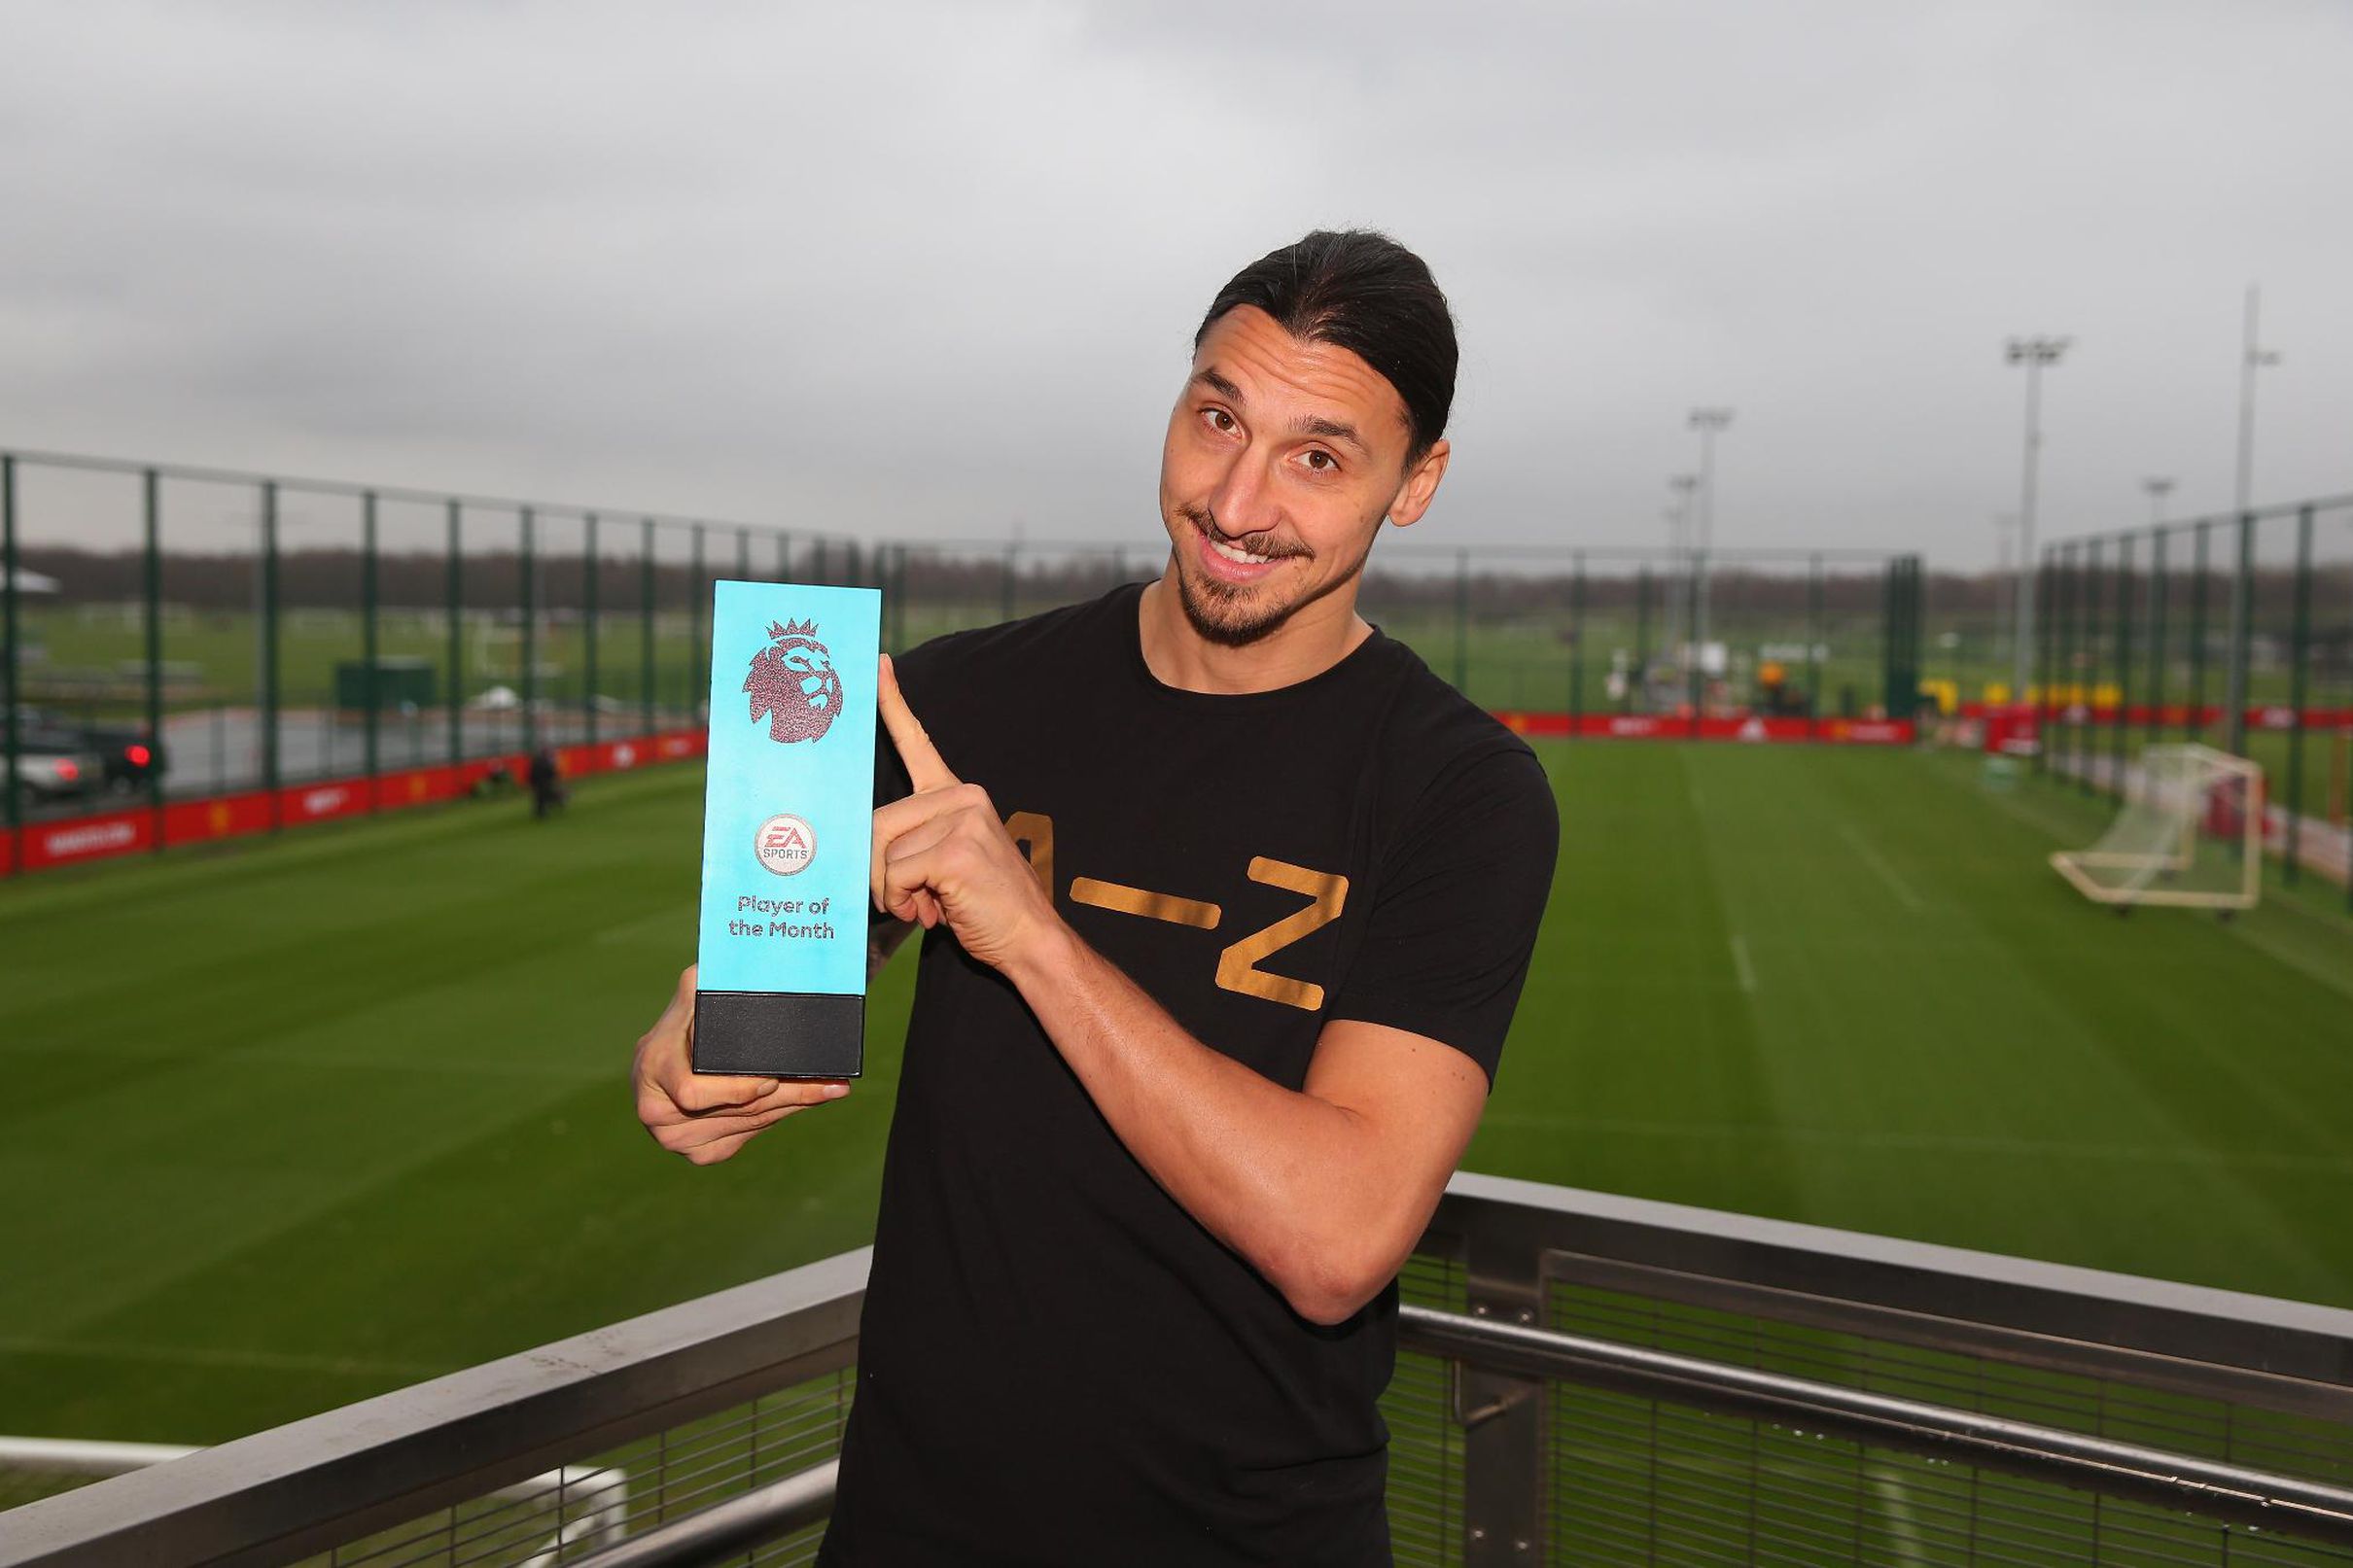 When will the premier league player of the month be announced